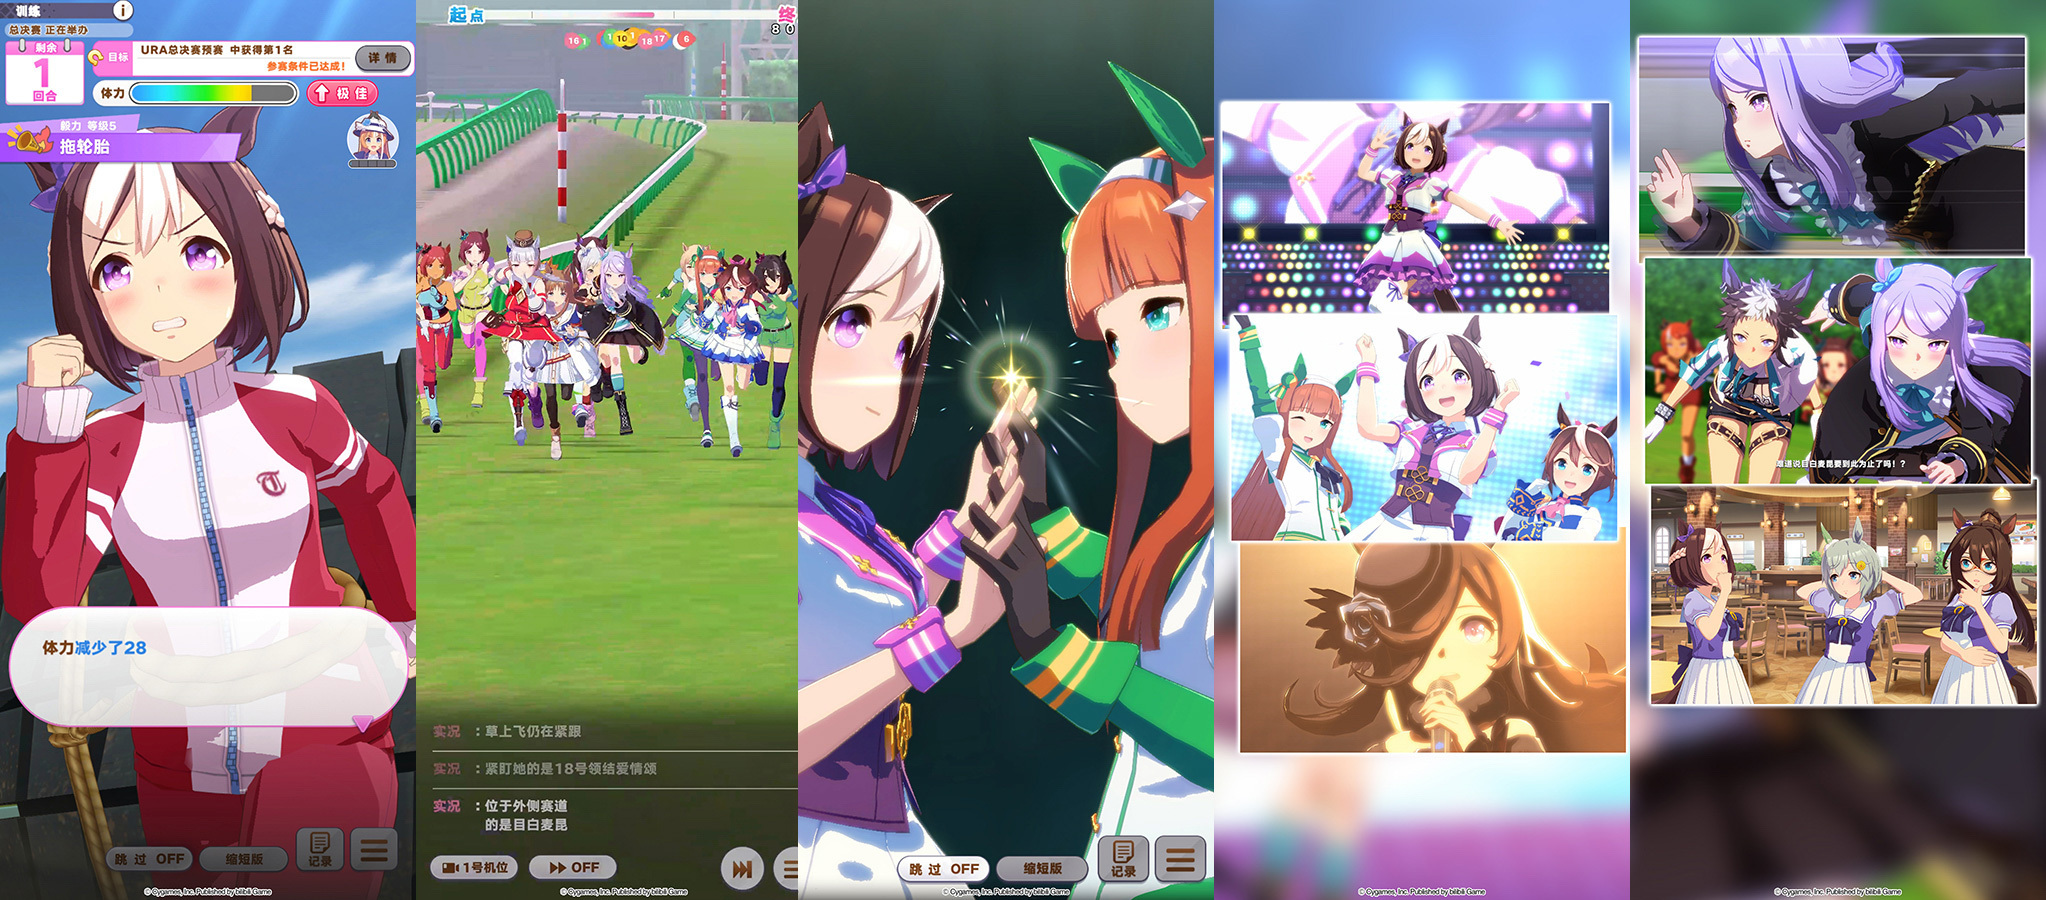 This anime girl derby mobile game is taking over Japan | KrASIA